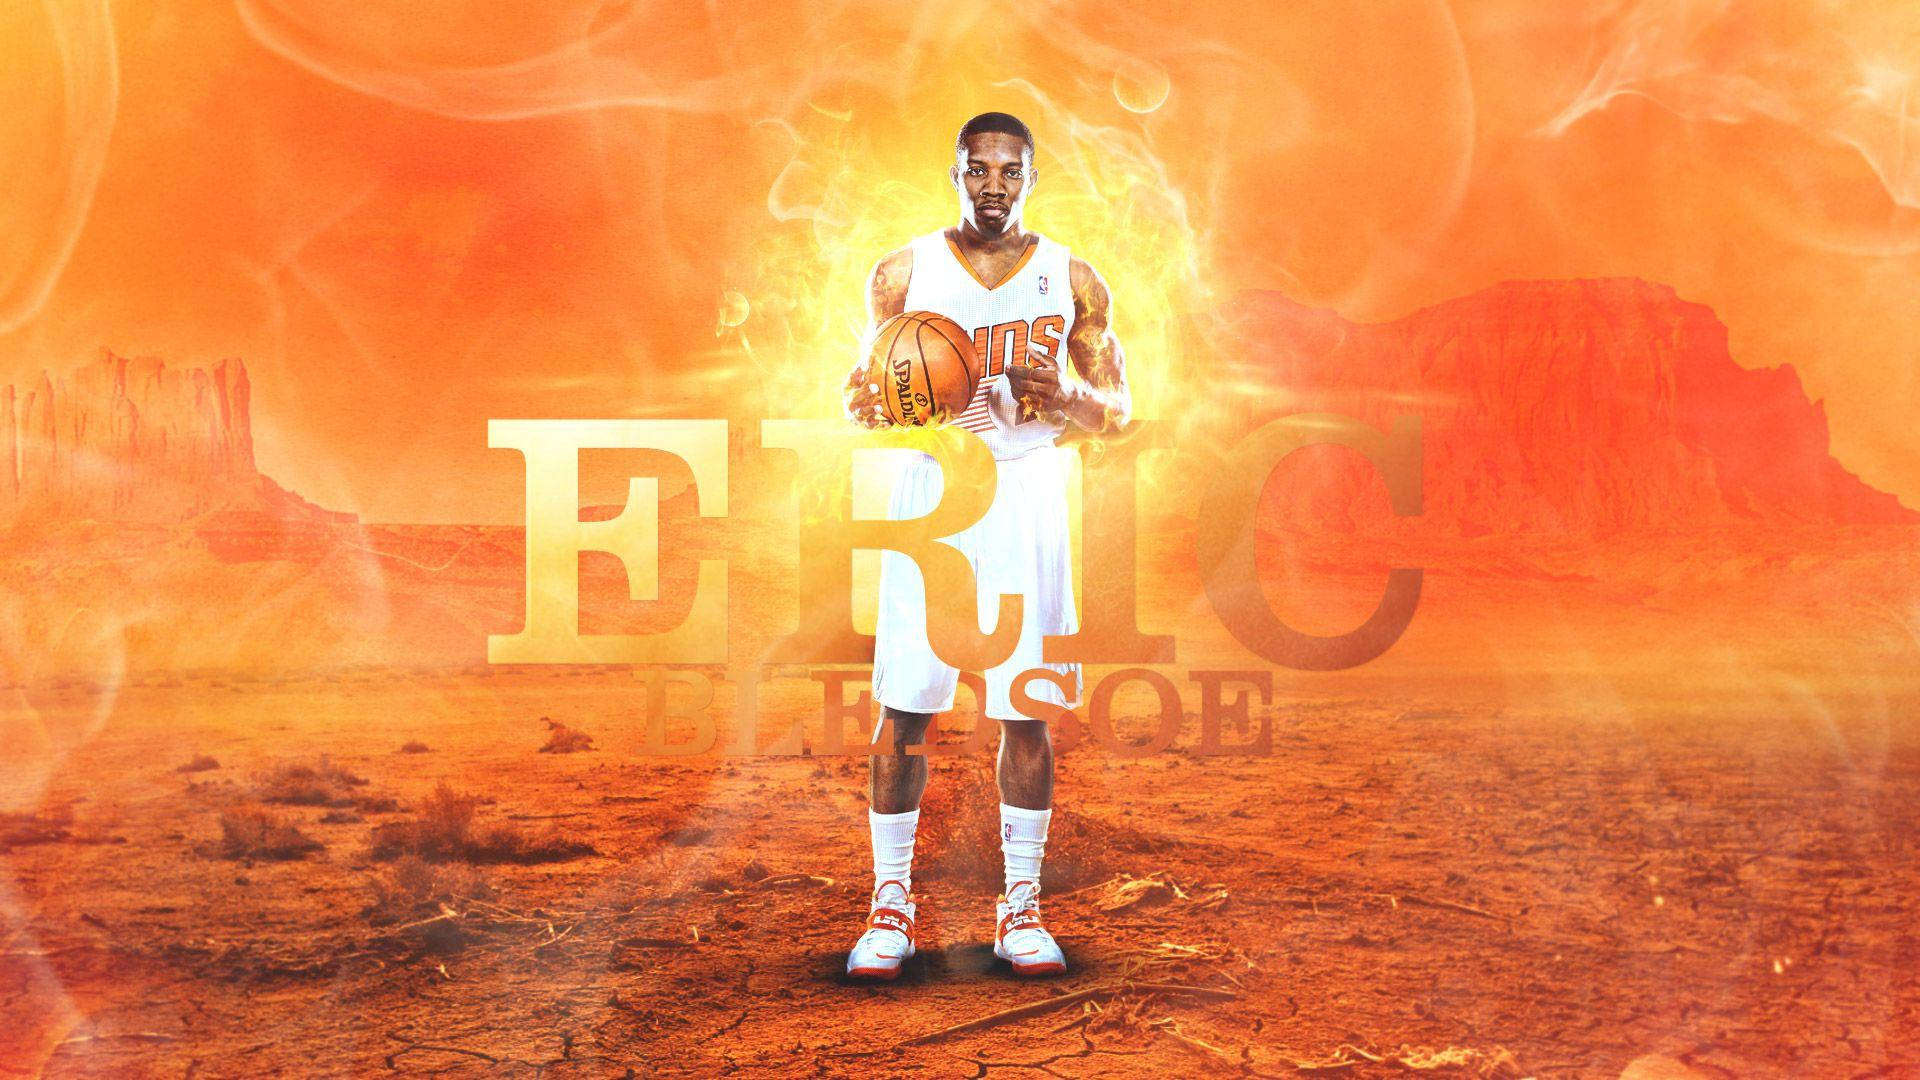 Eric Bledsoe On Fire Background